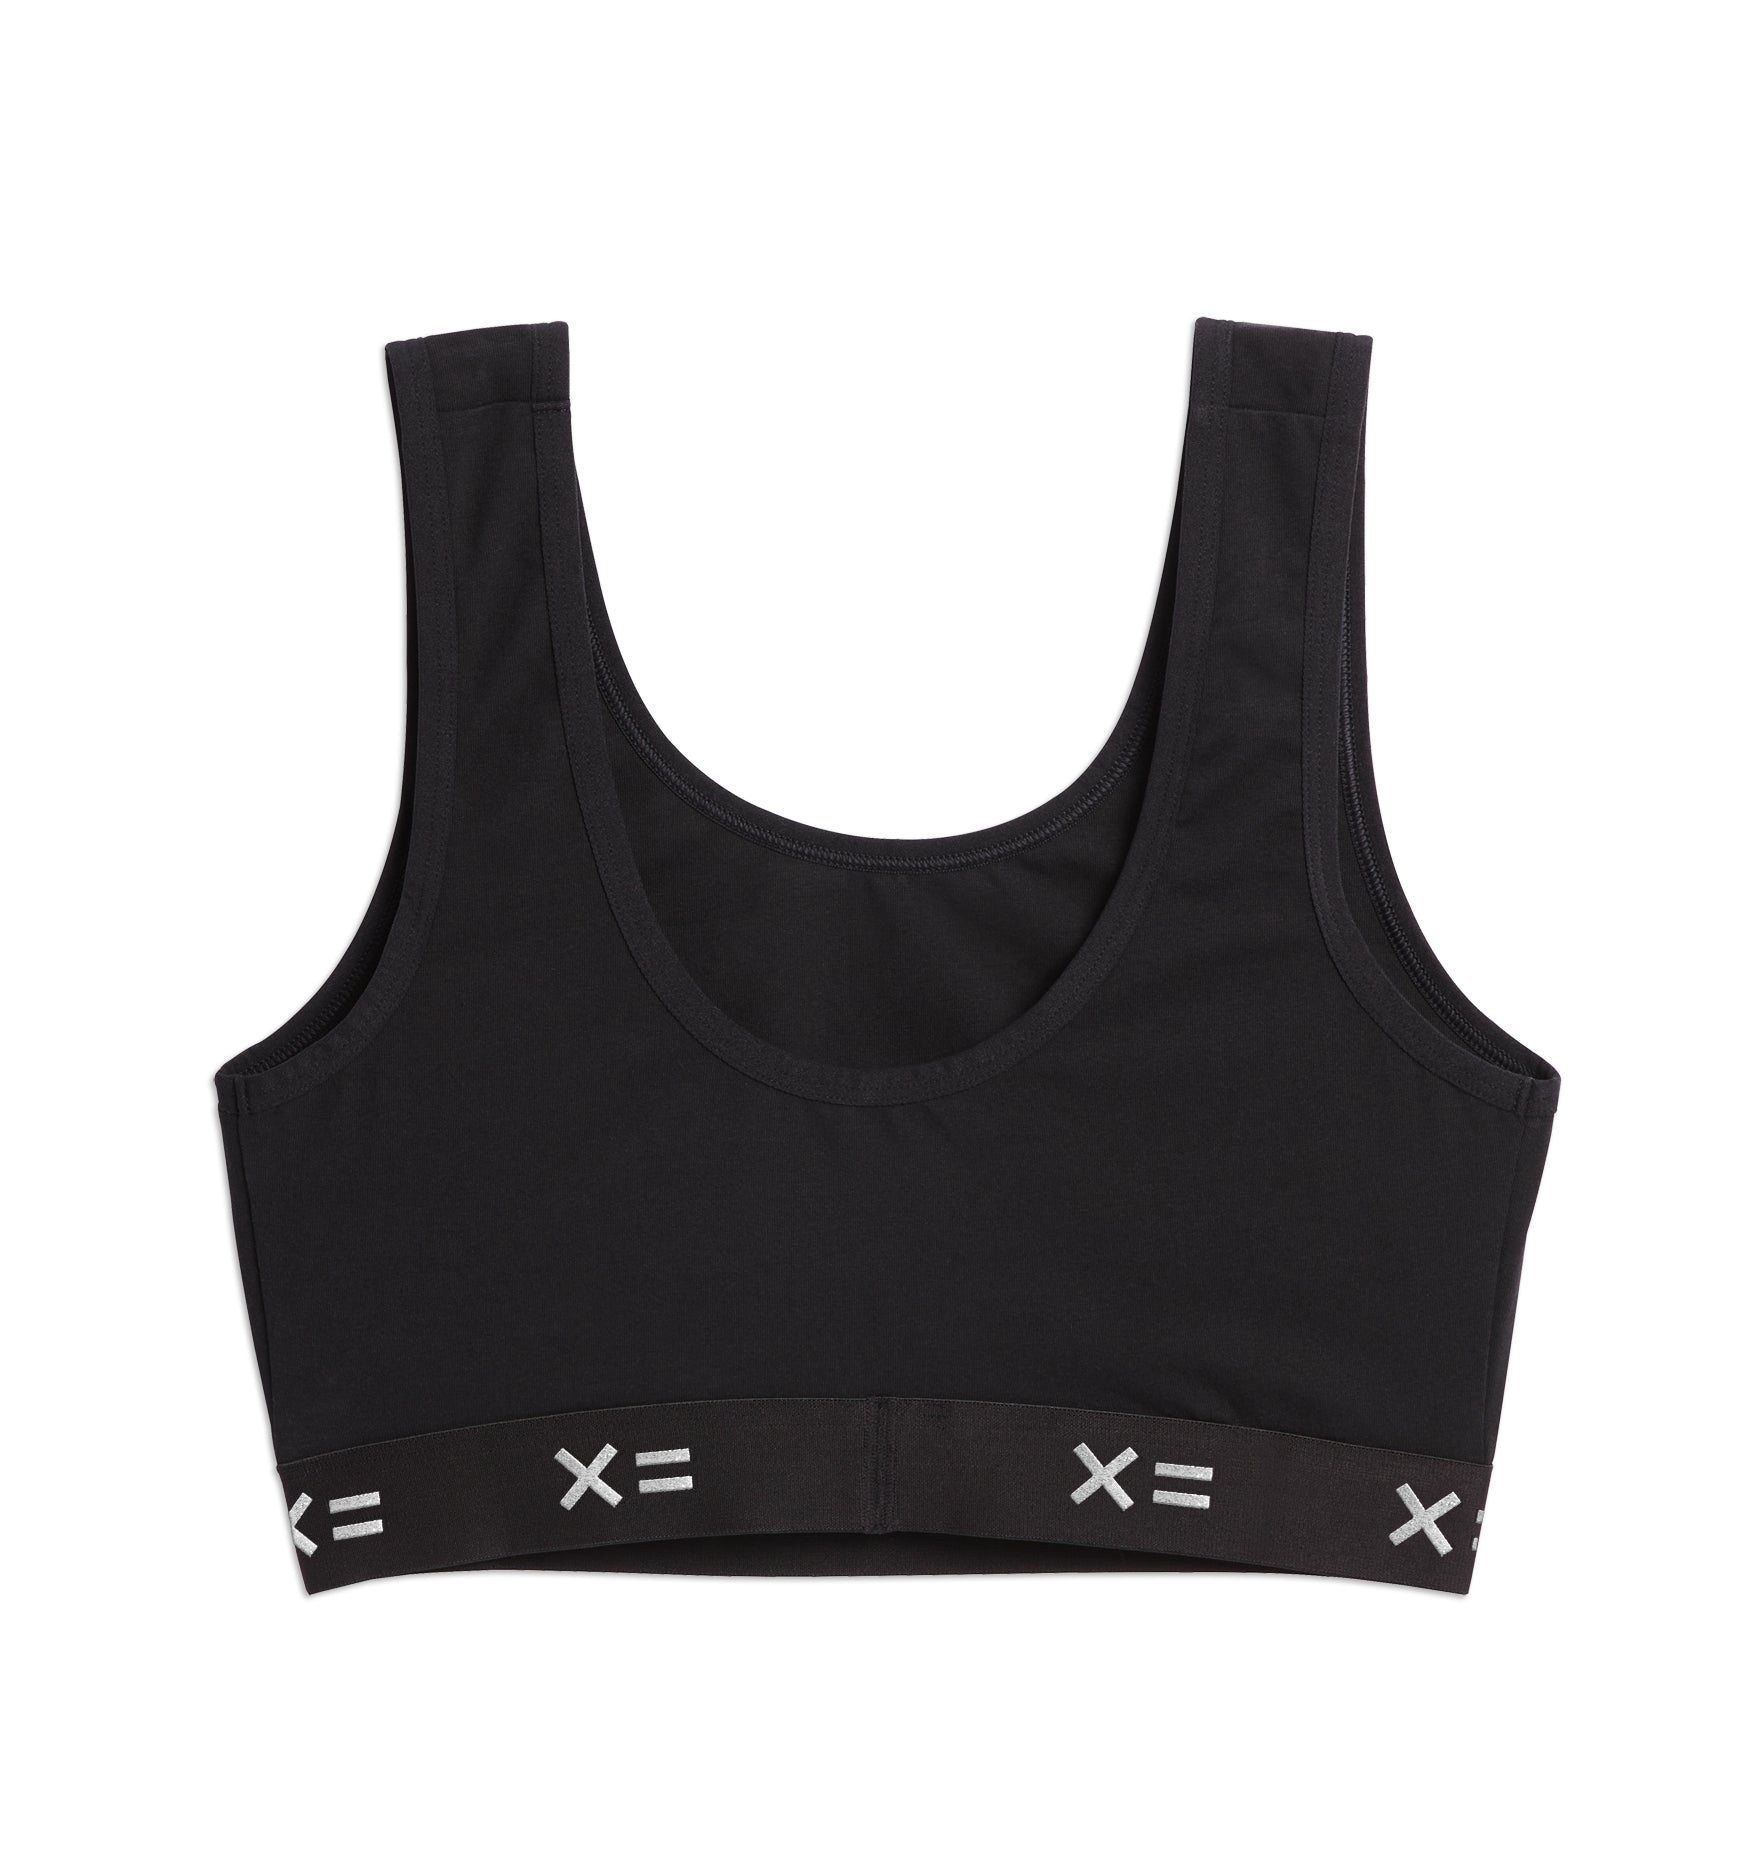 Tomboyx Sports Bra, Low Impact Support, Wirefree Athletic Strappy Back Top,  Womens Plus-size Inclusive Bras, (xs-6x) Black X Small : Target